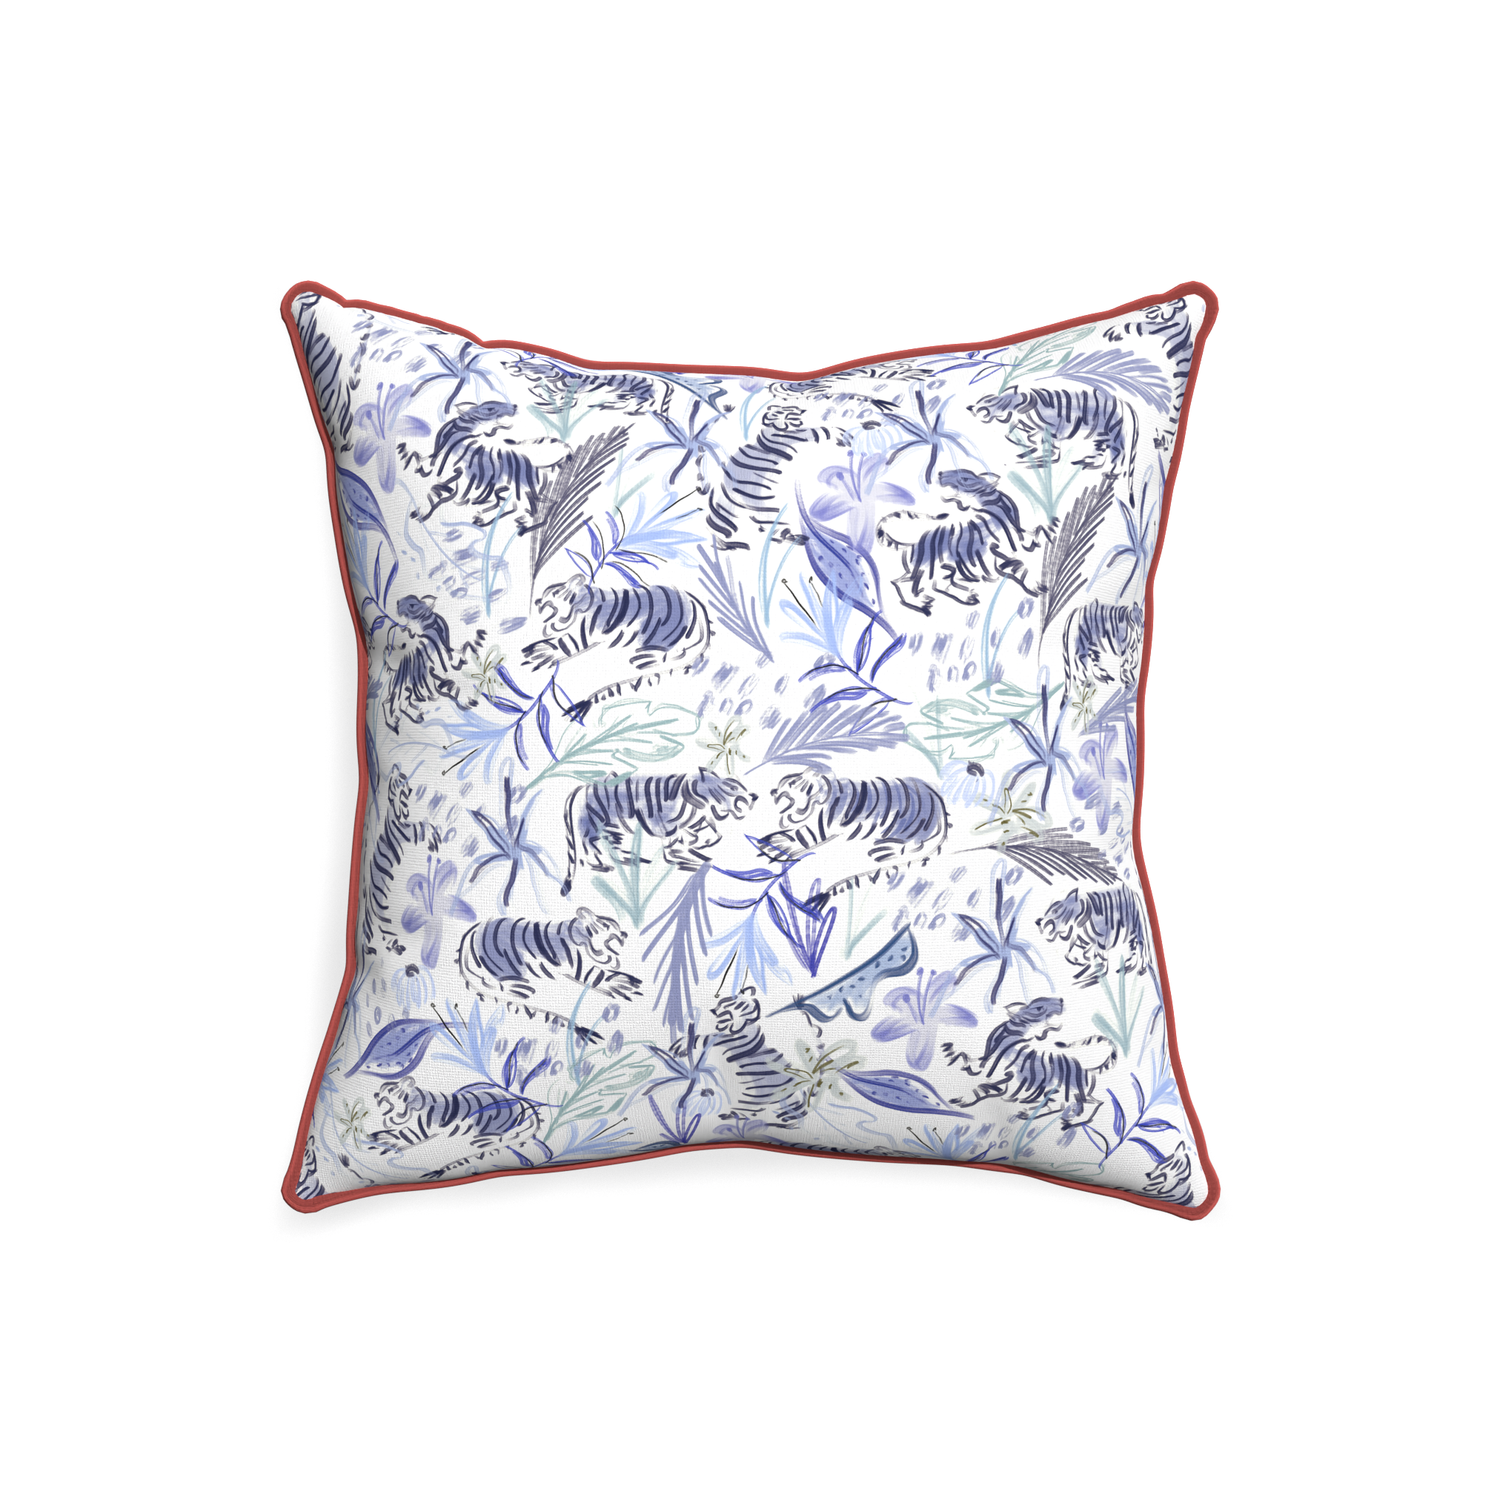 20-square frida blue custom blue with intricate tiger designpillow with c piping on white background